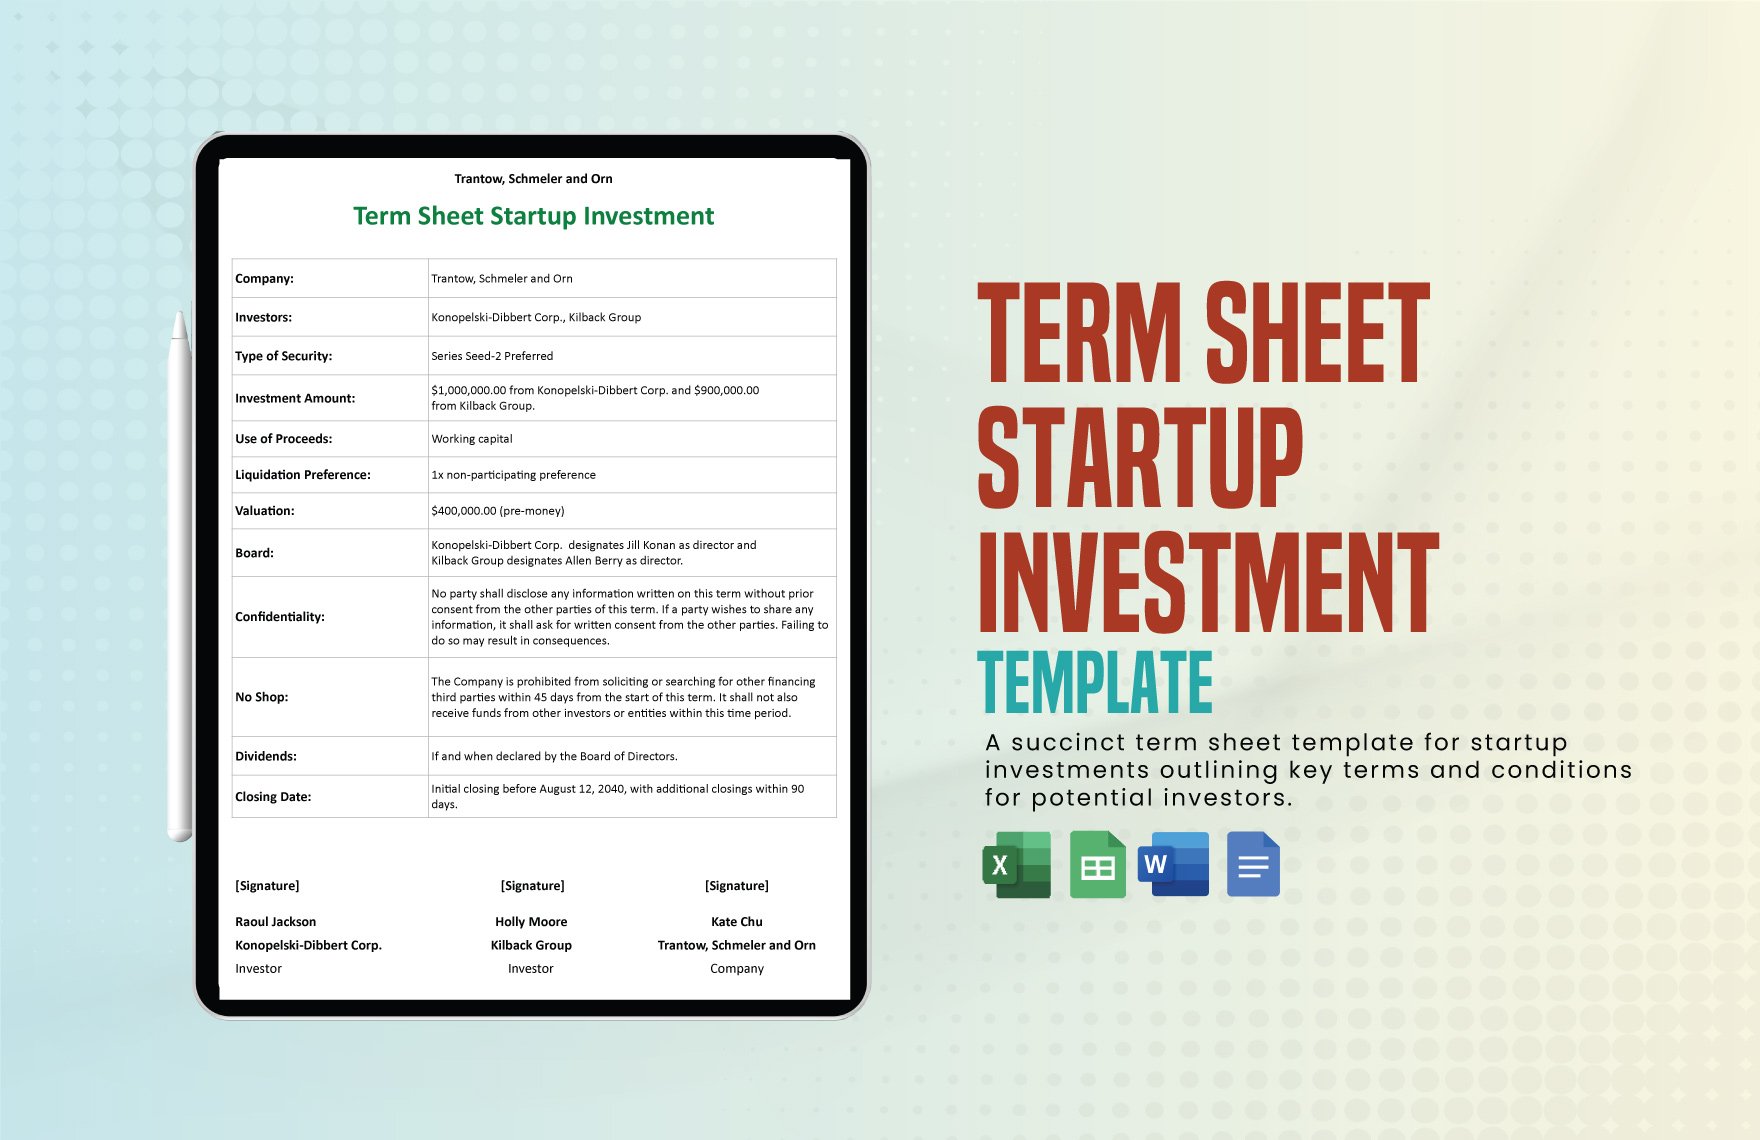 Term Sheet Startup Investment Template in Word, Google Docs, Excel, Google Sheets